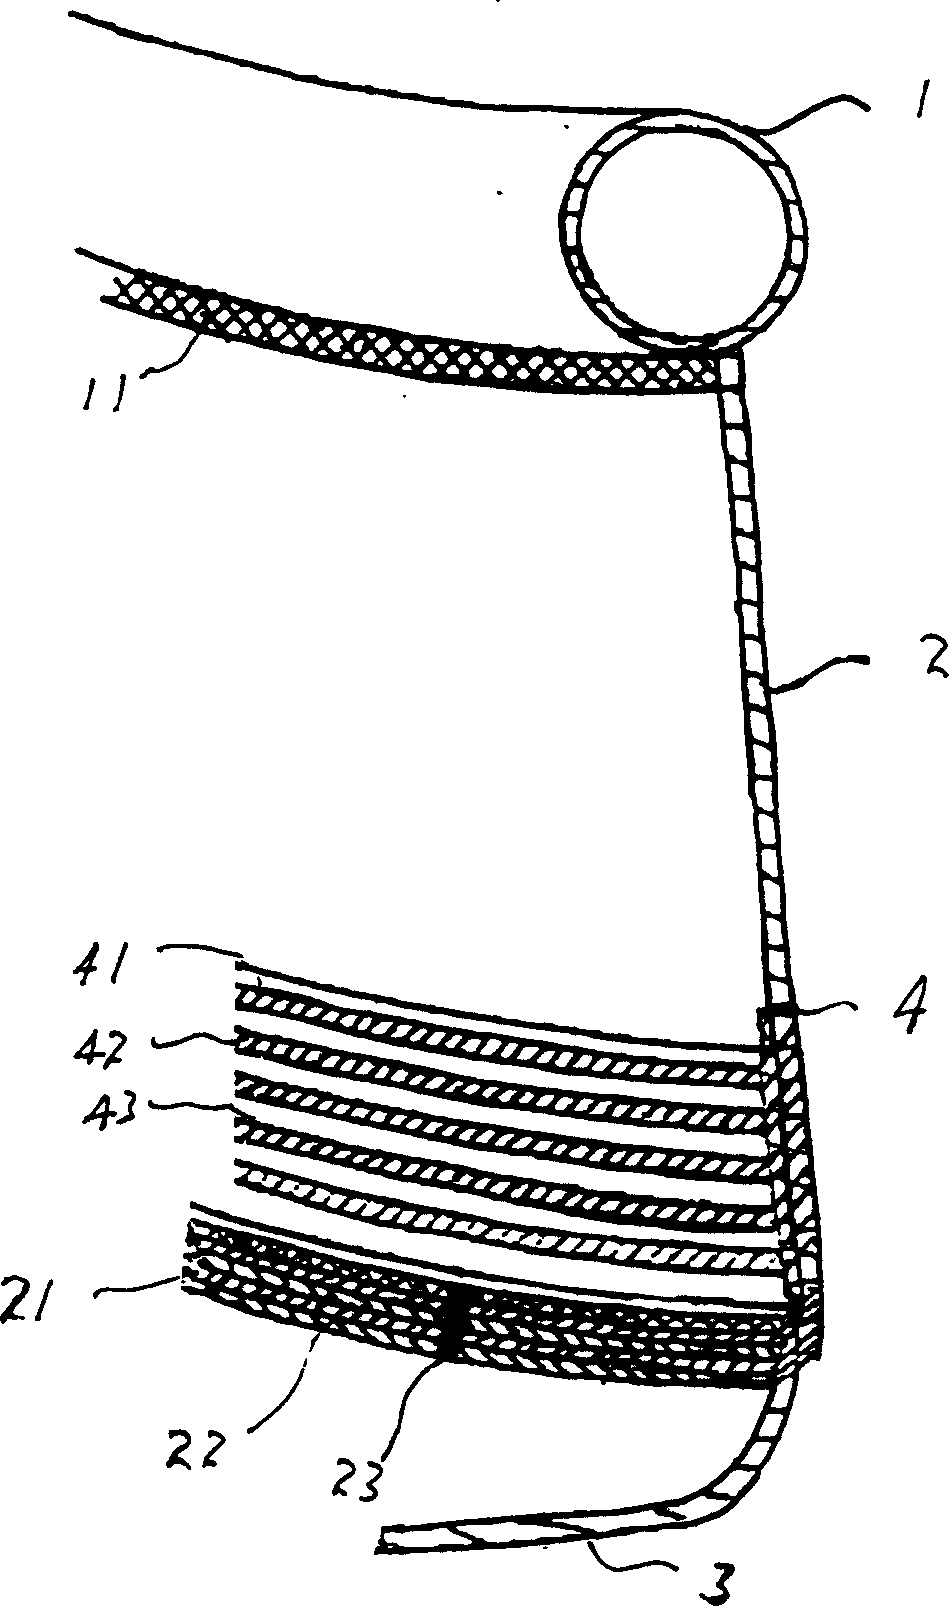 Dish shaped plastic water pool and its processing method